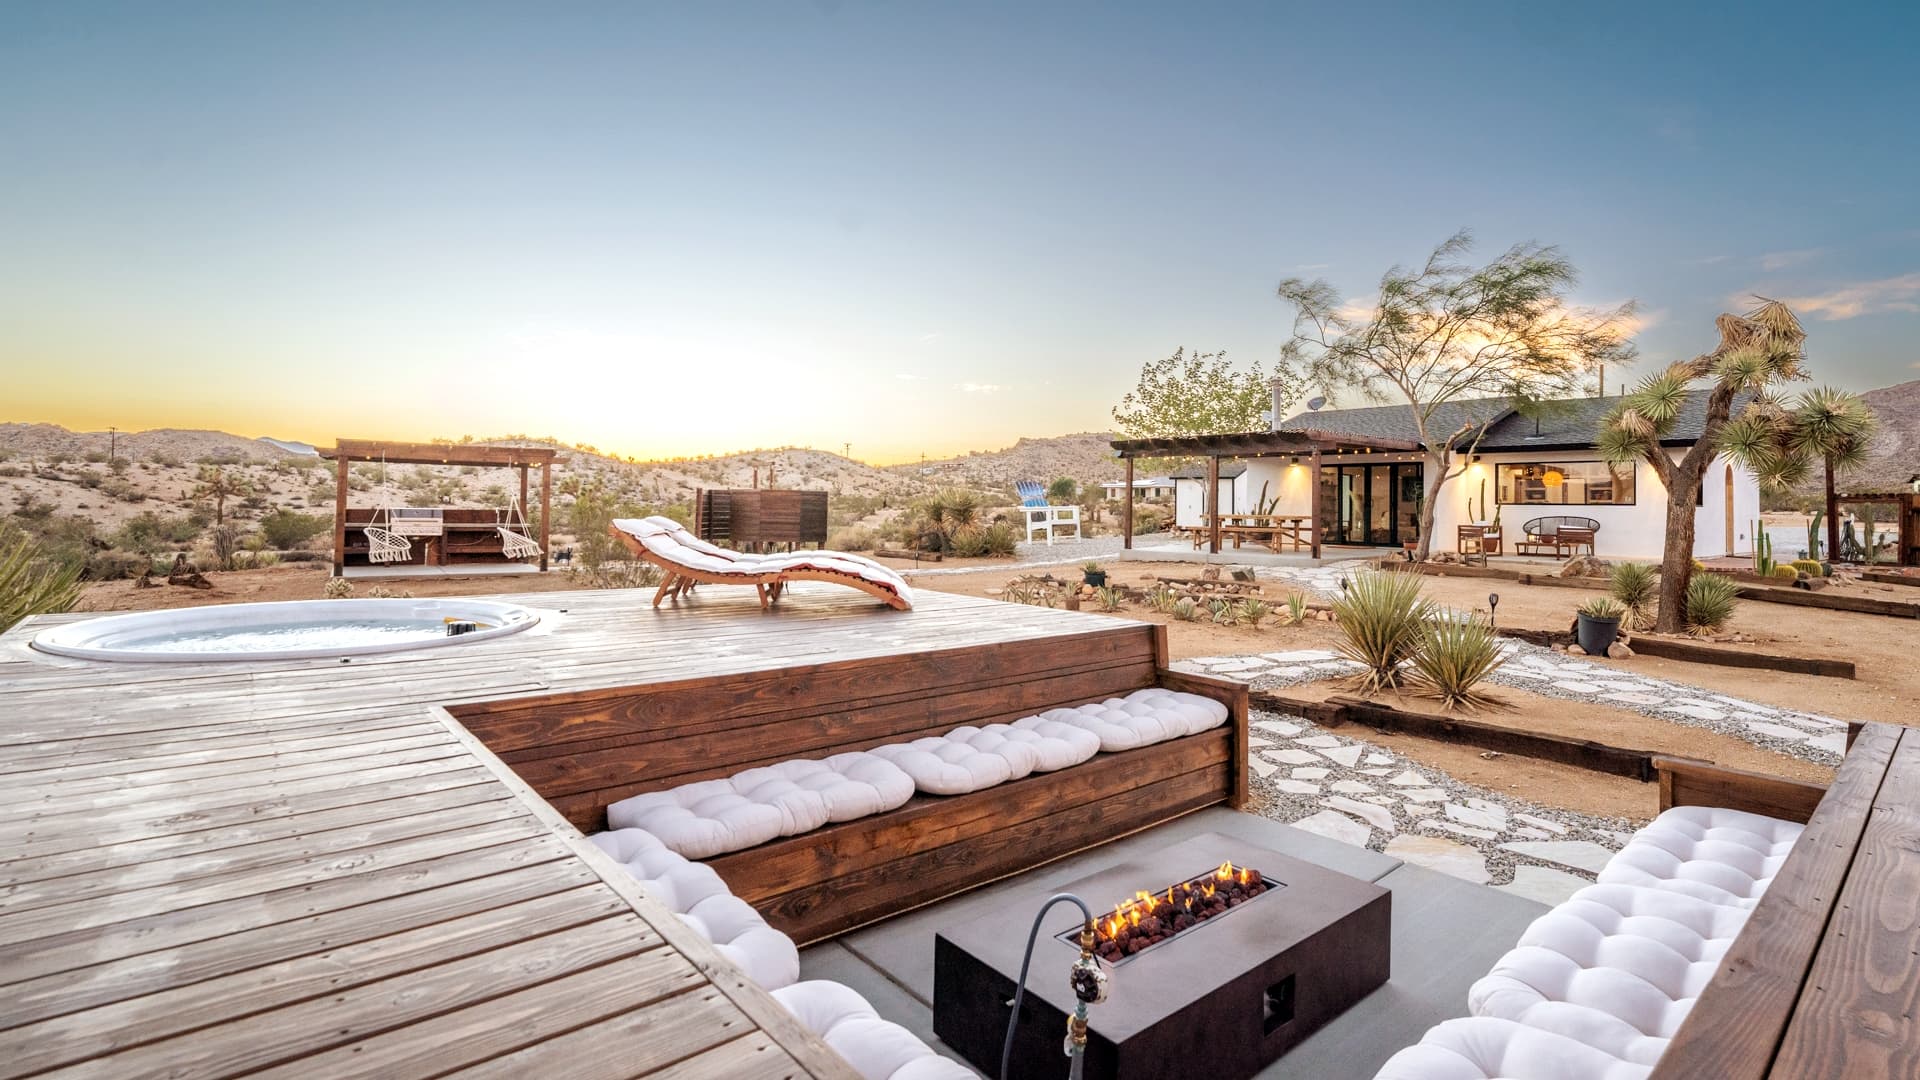 Casa Coyotes is a luxury villa that sits on five acres of land and only five minutes away from Joshua Tree National Park West Entrance in California.